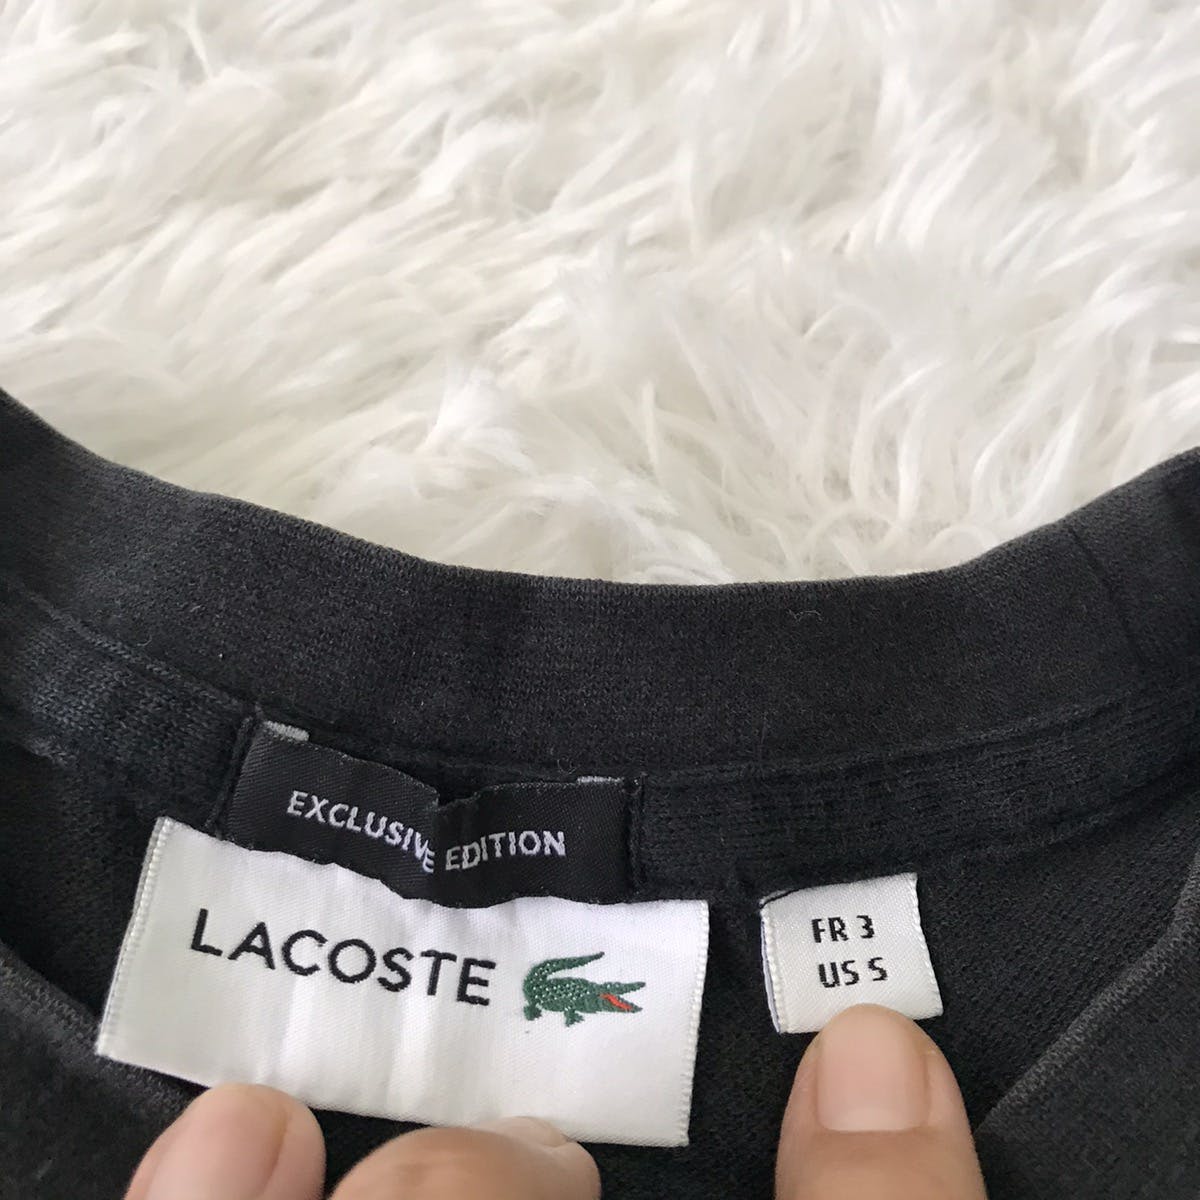 Lacoste exclusive edition tshirt (sun faded) - 13